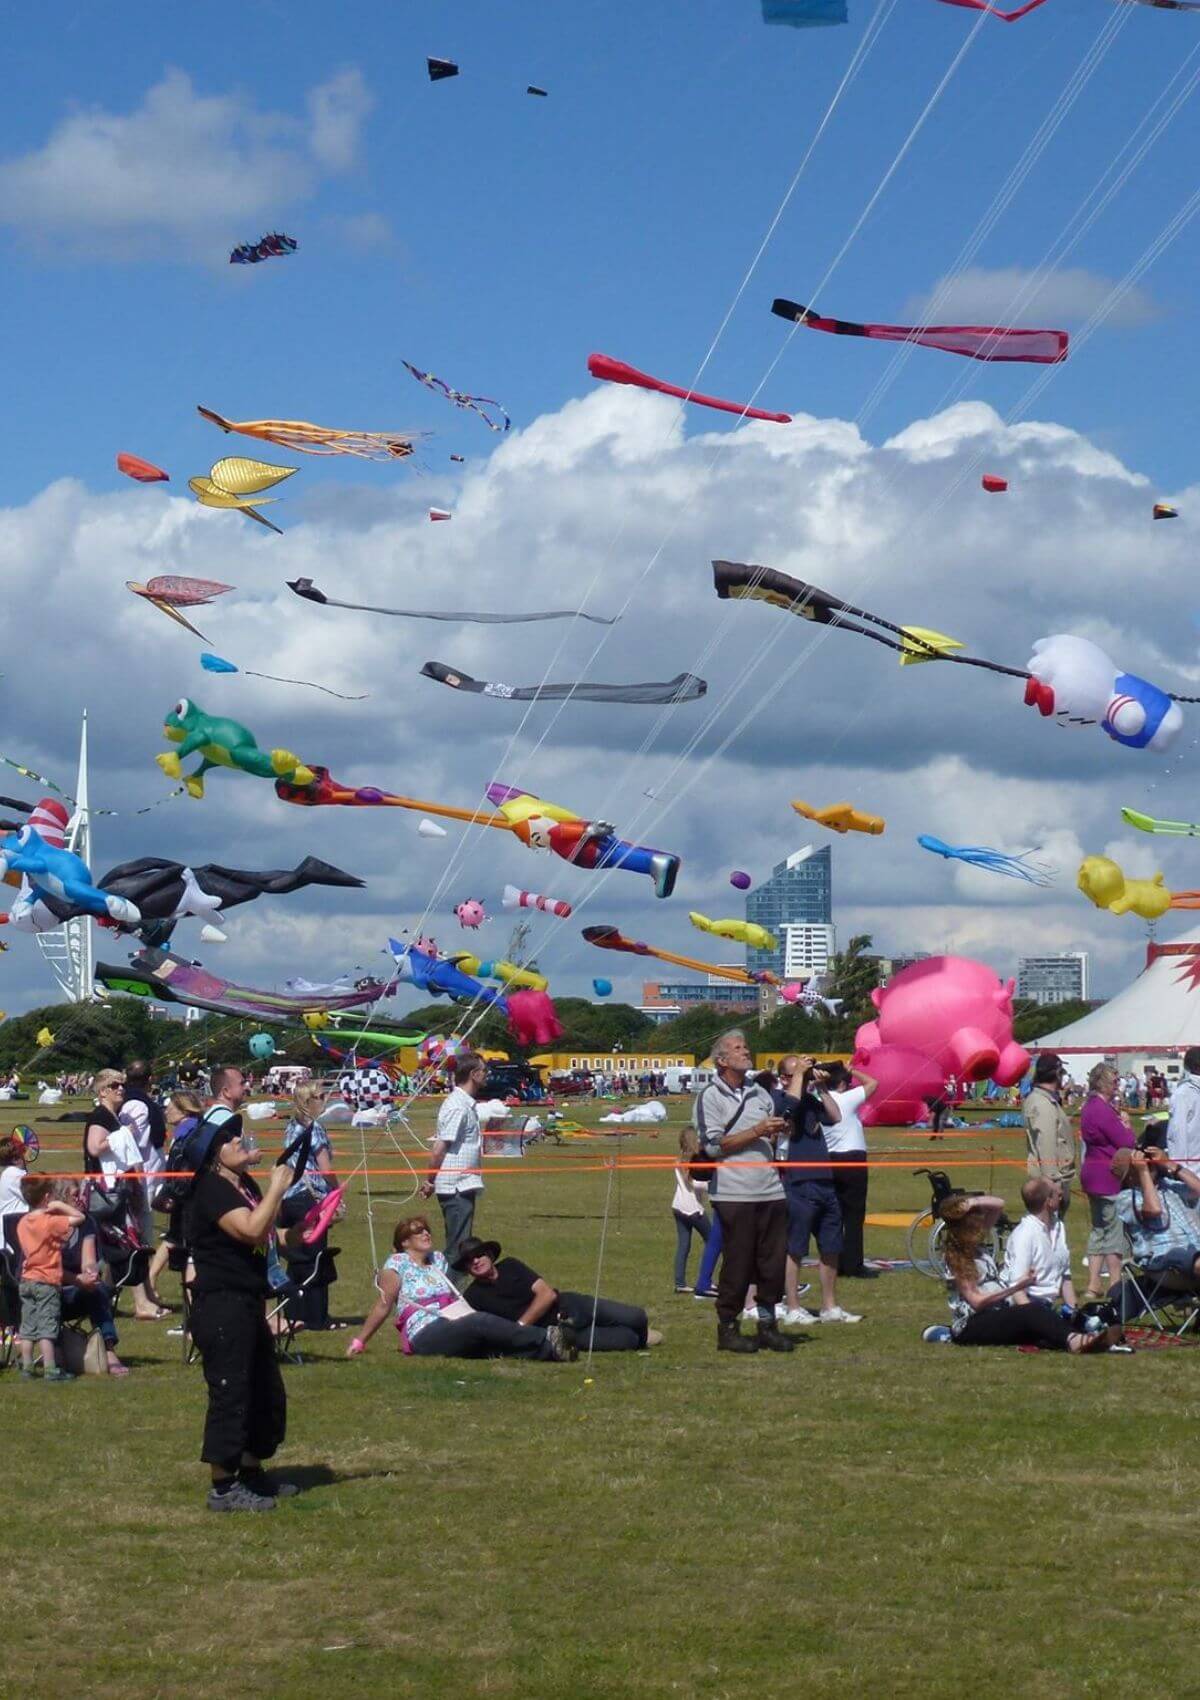 Head to the Portsmouth International Kite Festival for a day out in July